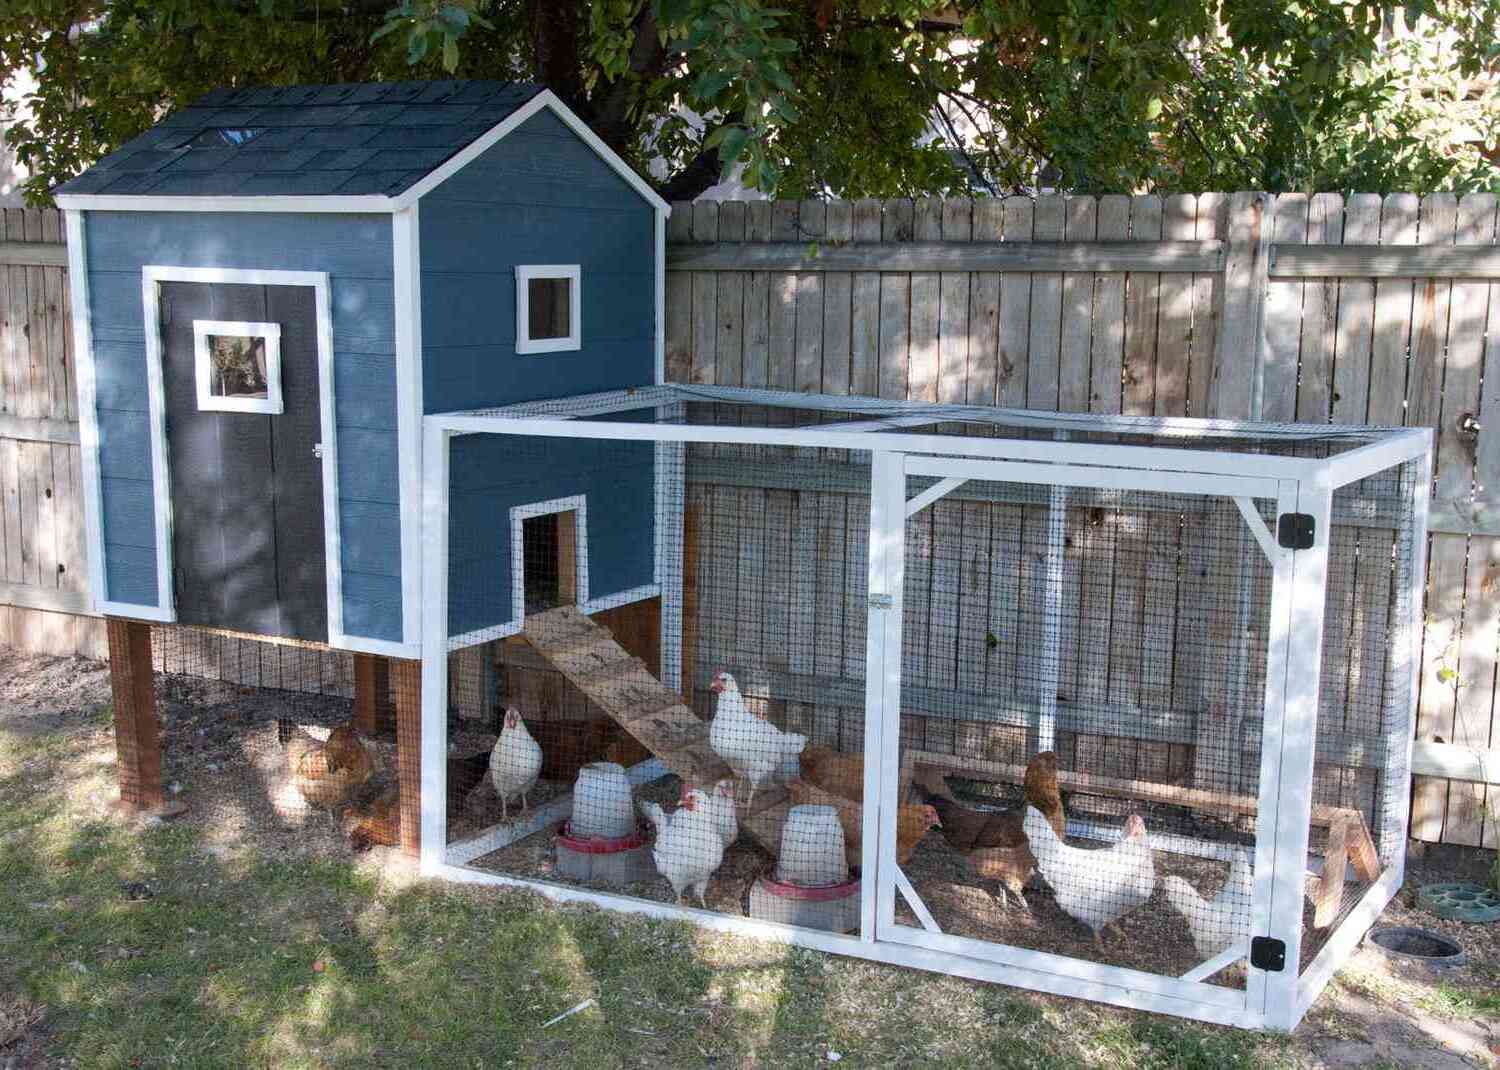 Easy Chicken Coop Plans: Build Your Own Coop With These Step-by-Step Instructions